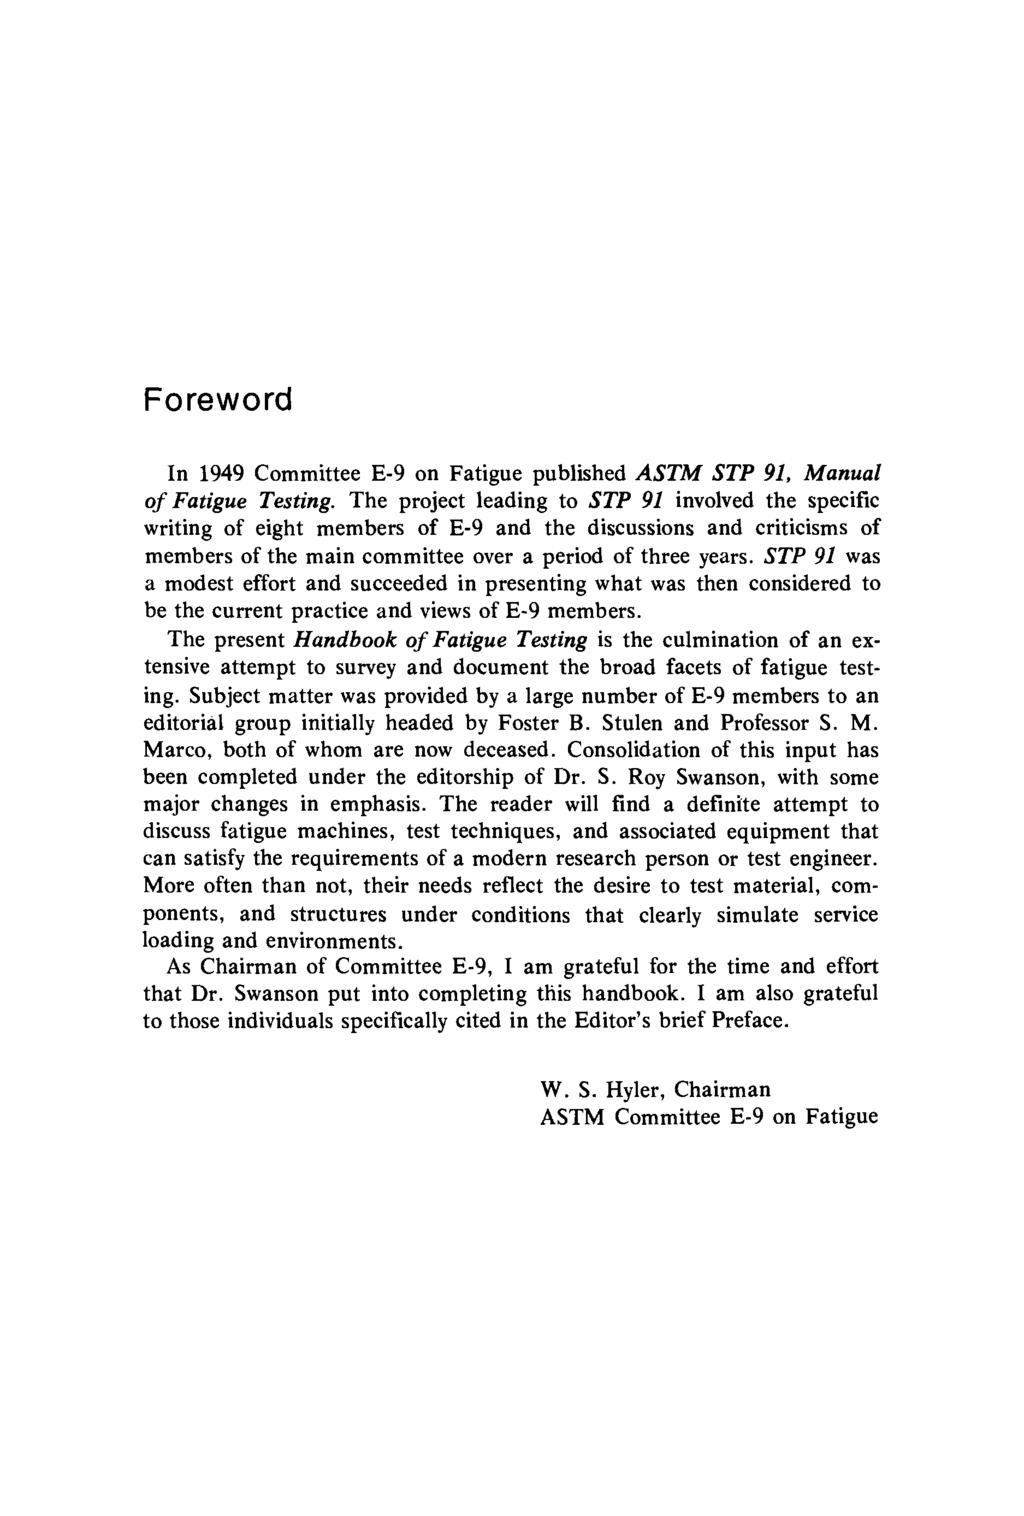 Foreword In 1949 Committee E-9 on Fatigue published ASTM STP 91, Manual of Fatigue Testing.